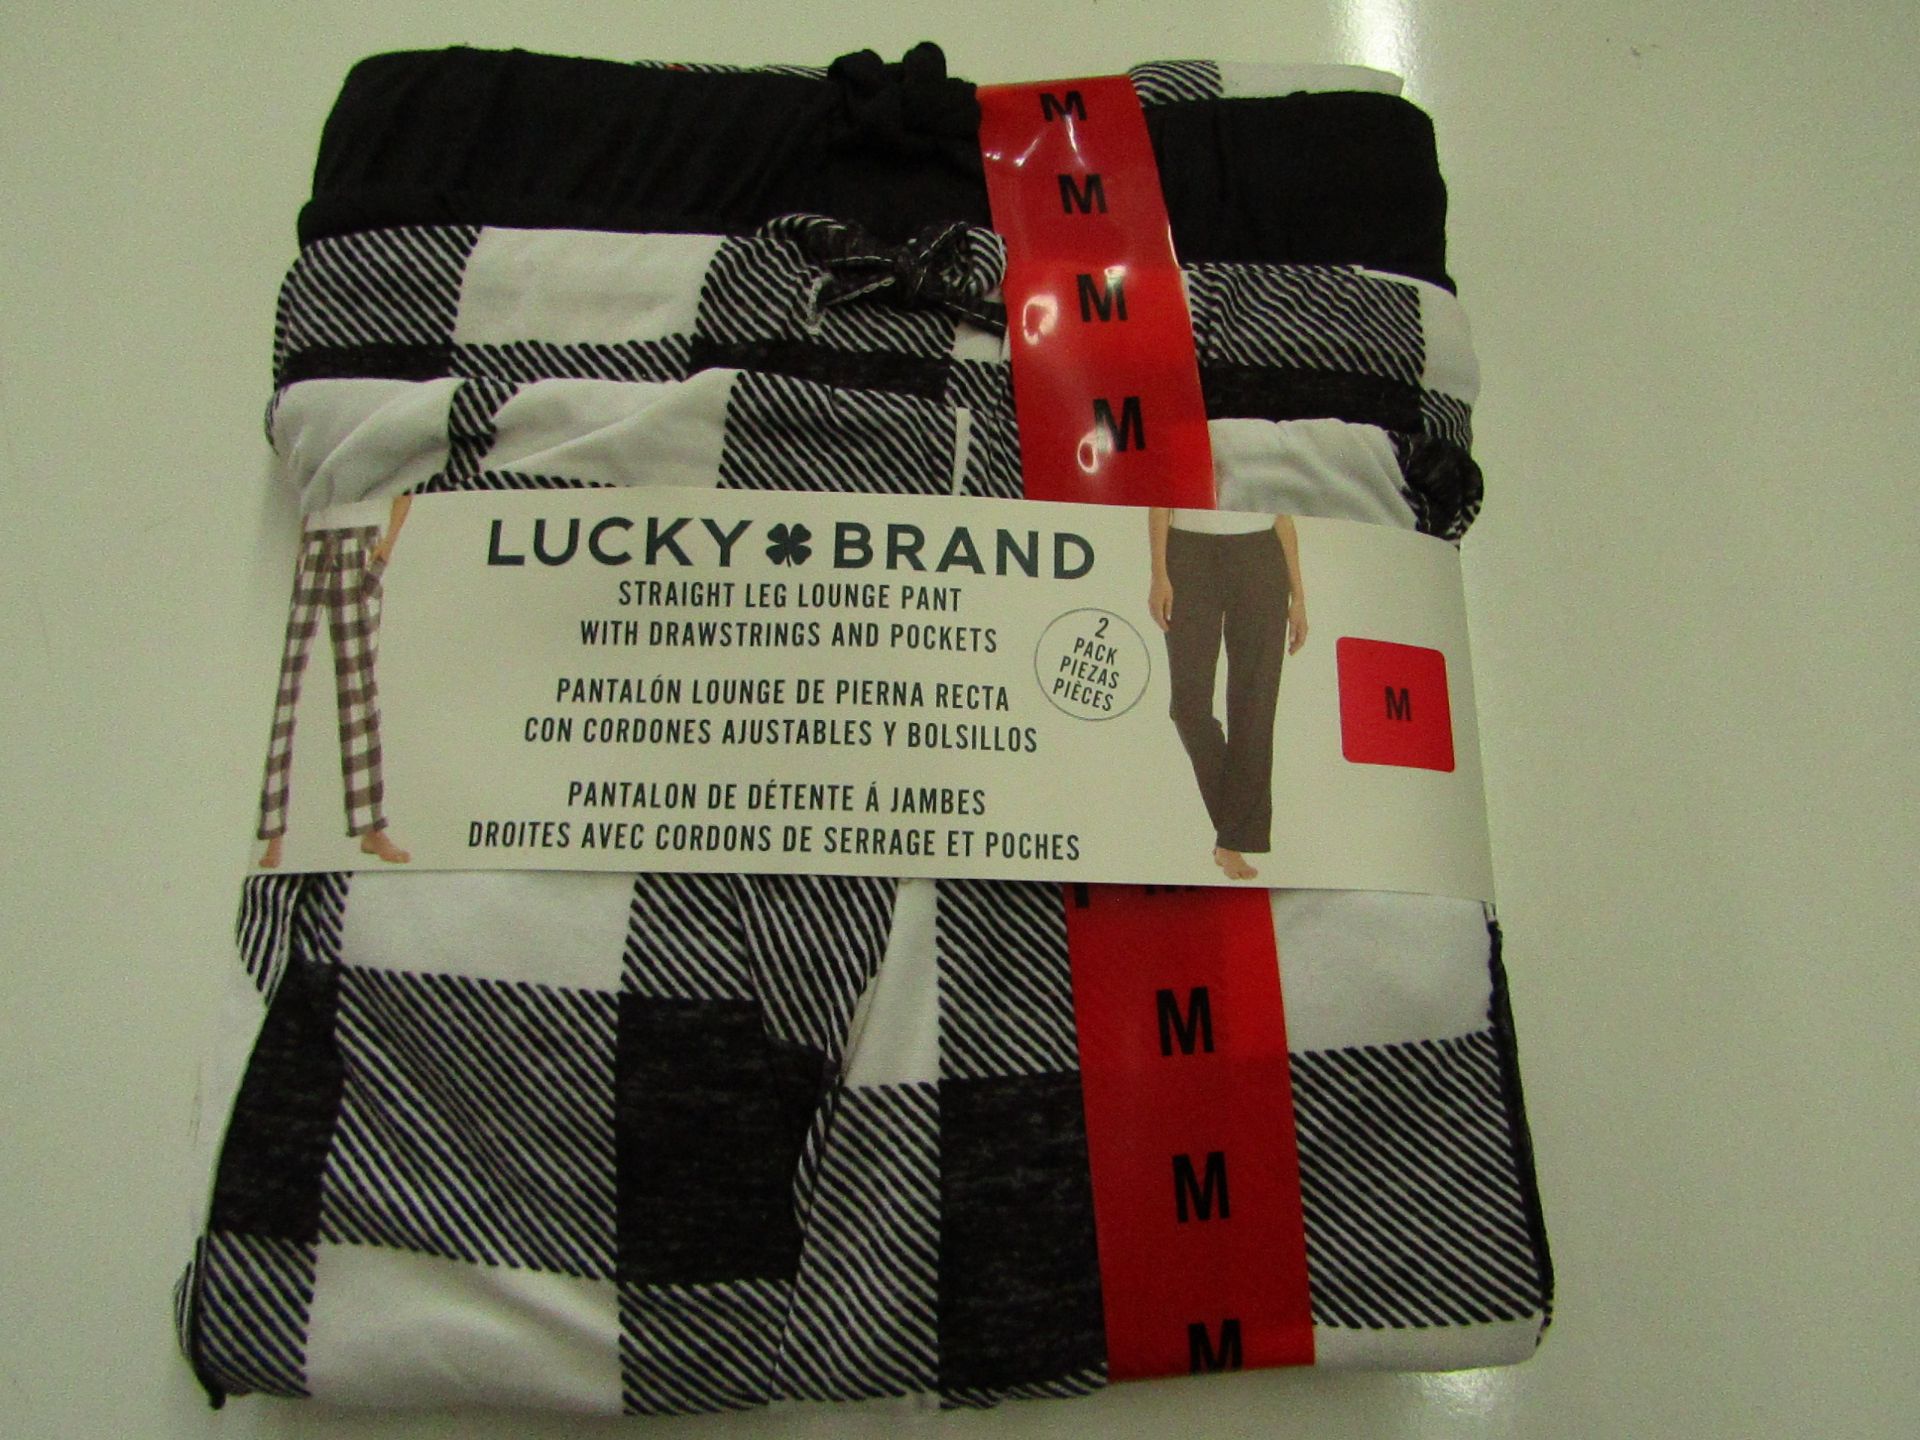 Lucky Brand - Straight Leg Lounge Set With Pockets - Size Medium - New & Packaged